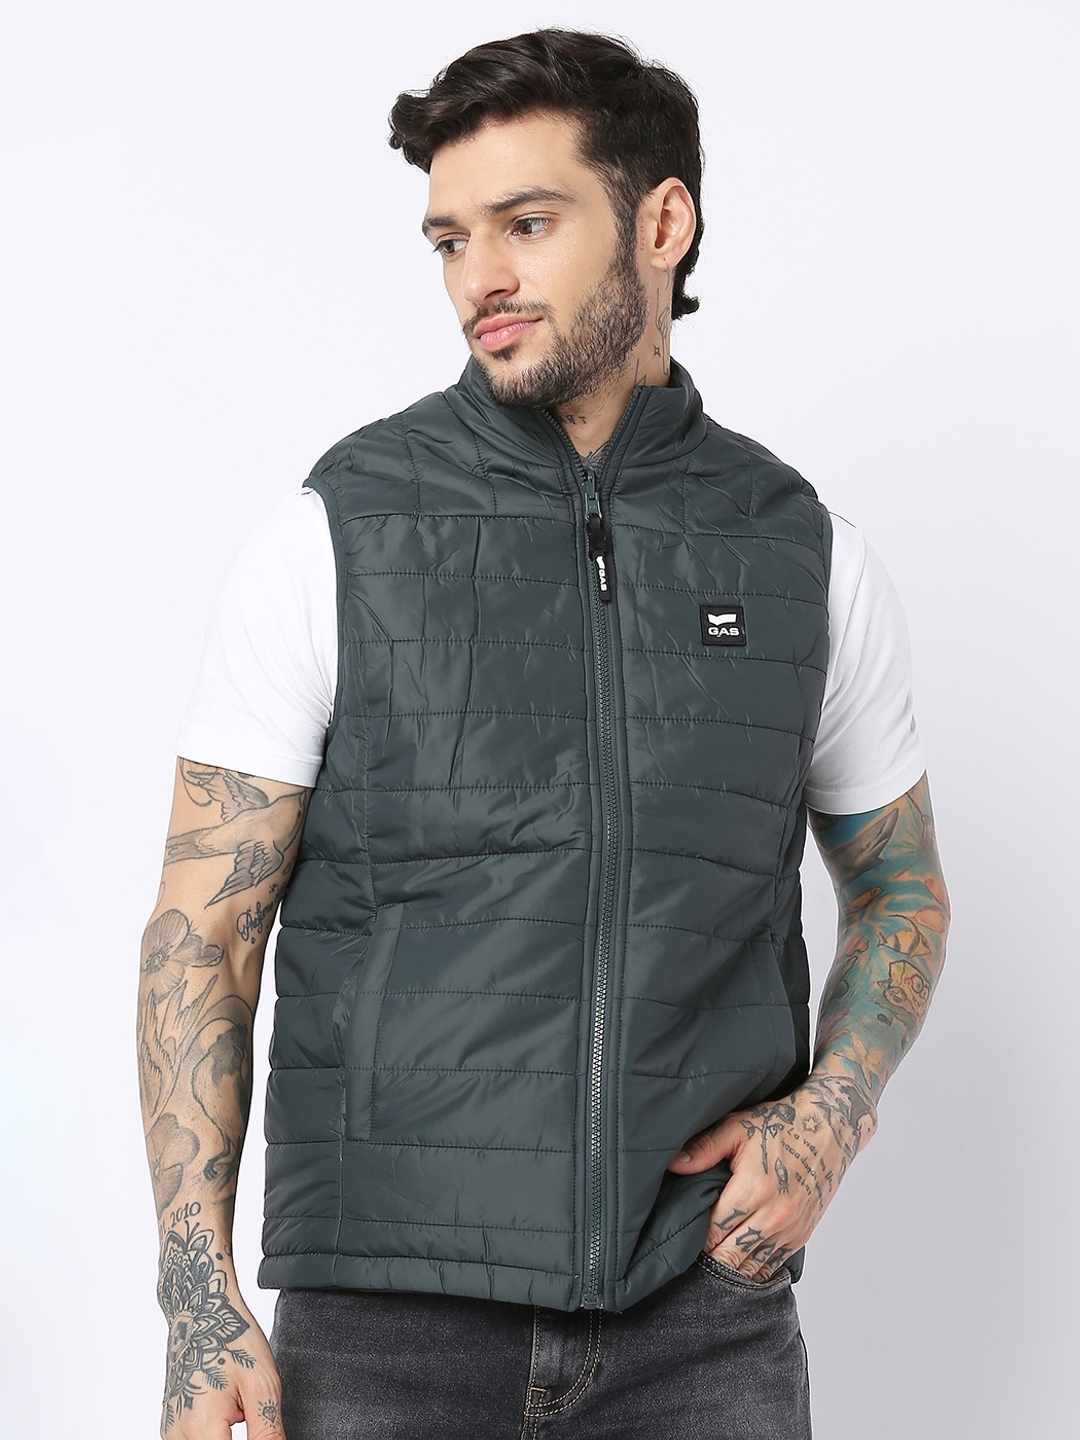 Mens Small Fall Jacket Men's Down Vest Jacket Coat Ultralight Gilet With  White Down Packable Down Gilet With Rain Mens Mens Winter Hiking Jacket  Light Weight Rain Jacket for Men Winter Coats